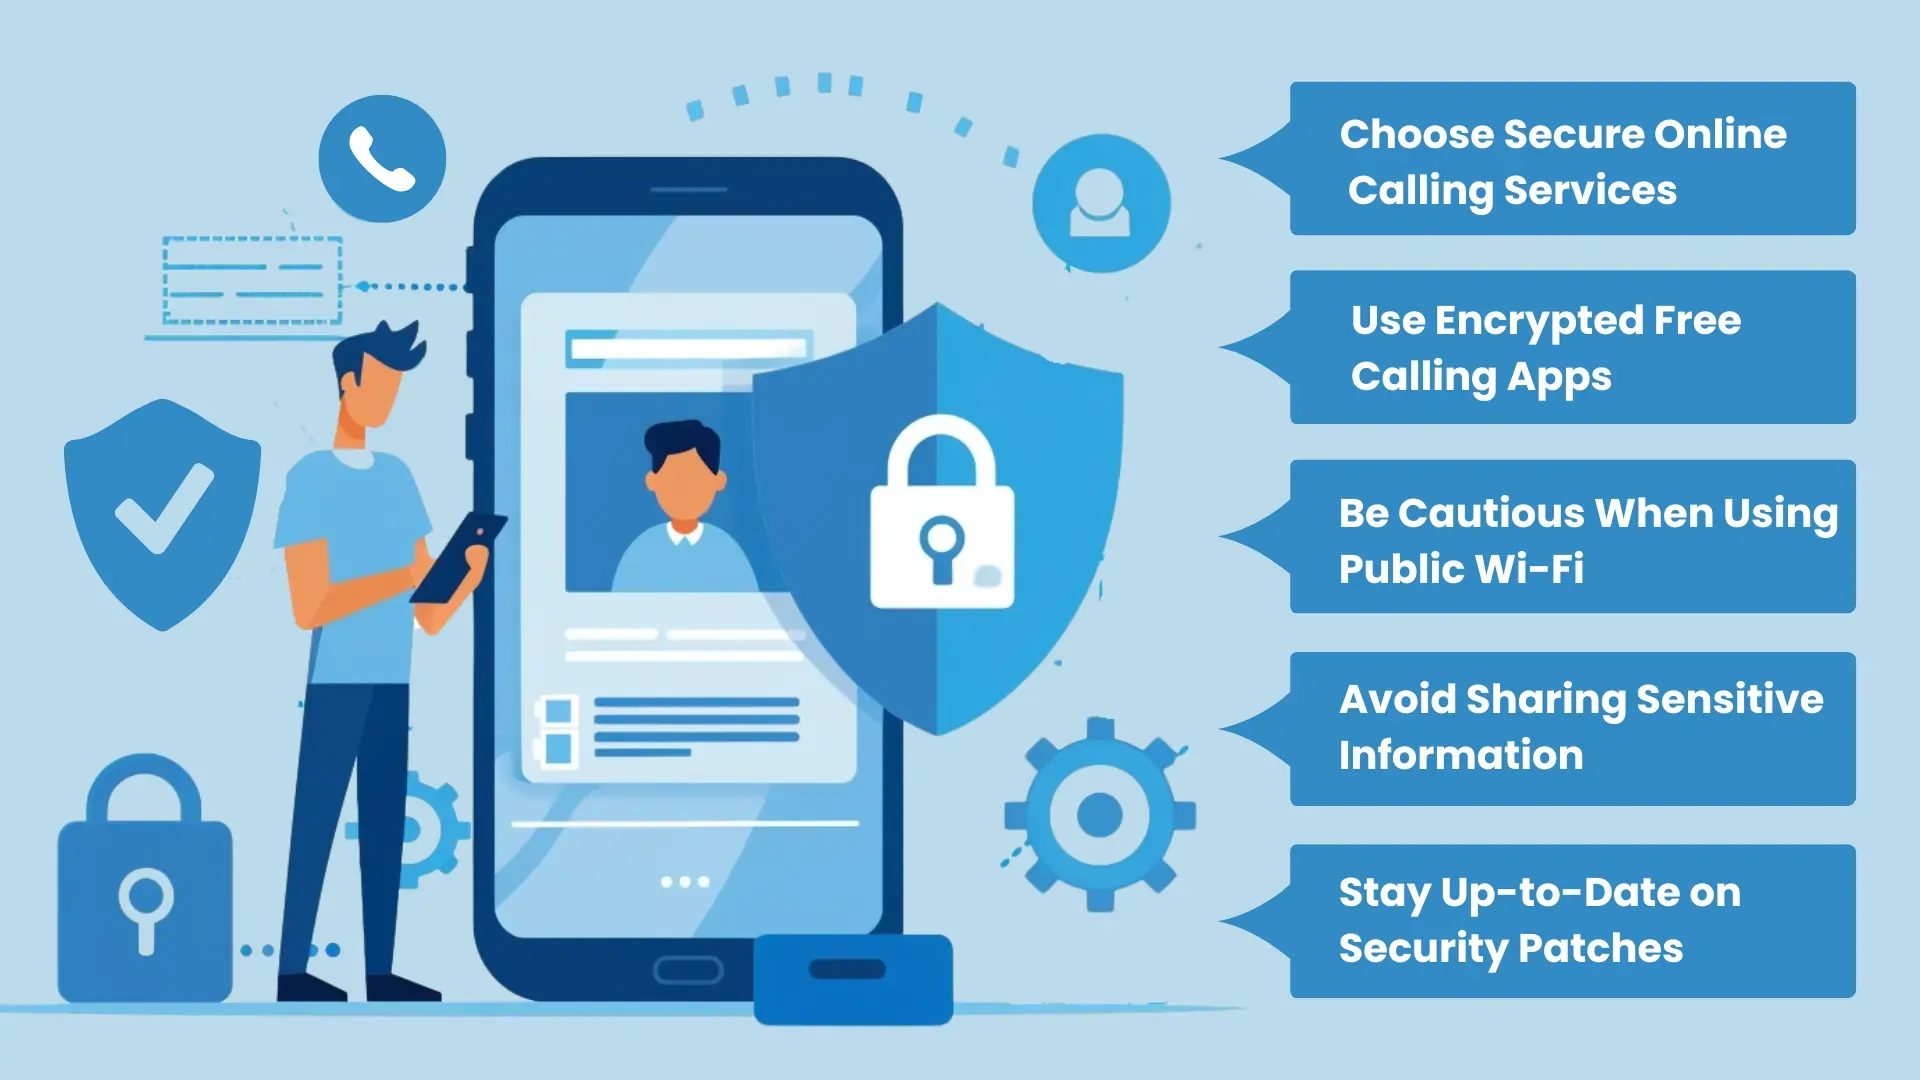 Ensuring Security and Privacy in Online Calls